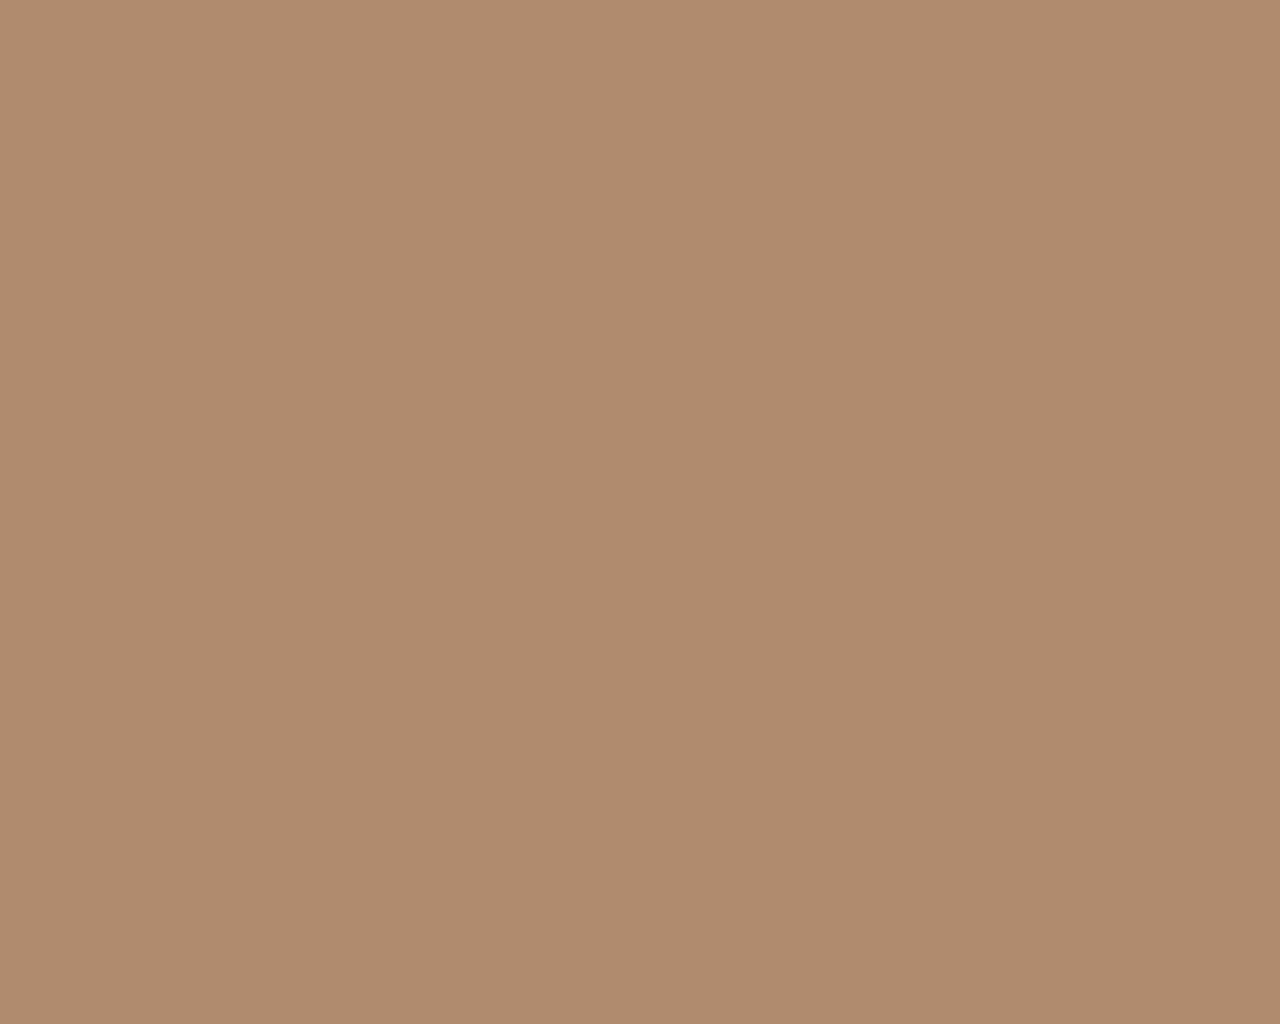 1280x1024 Light Taupe Solid Color Background